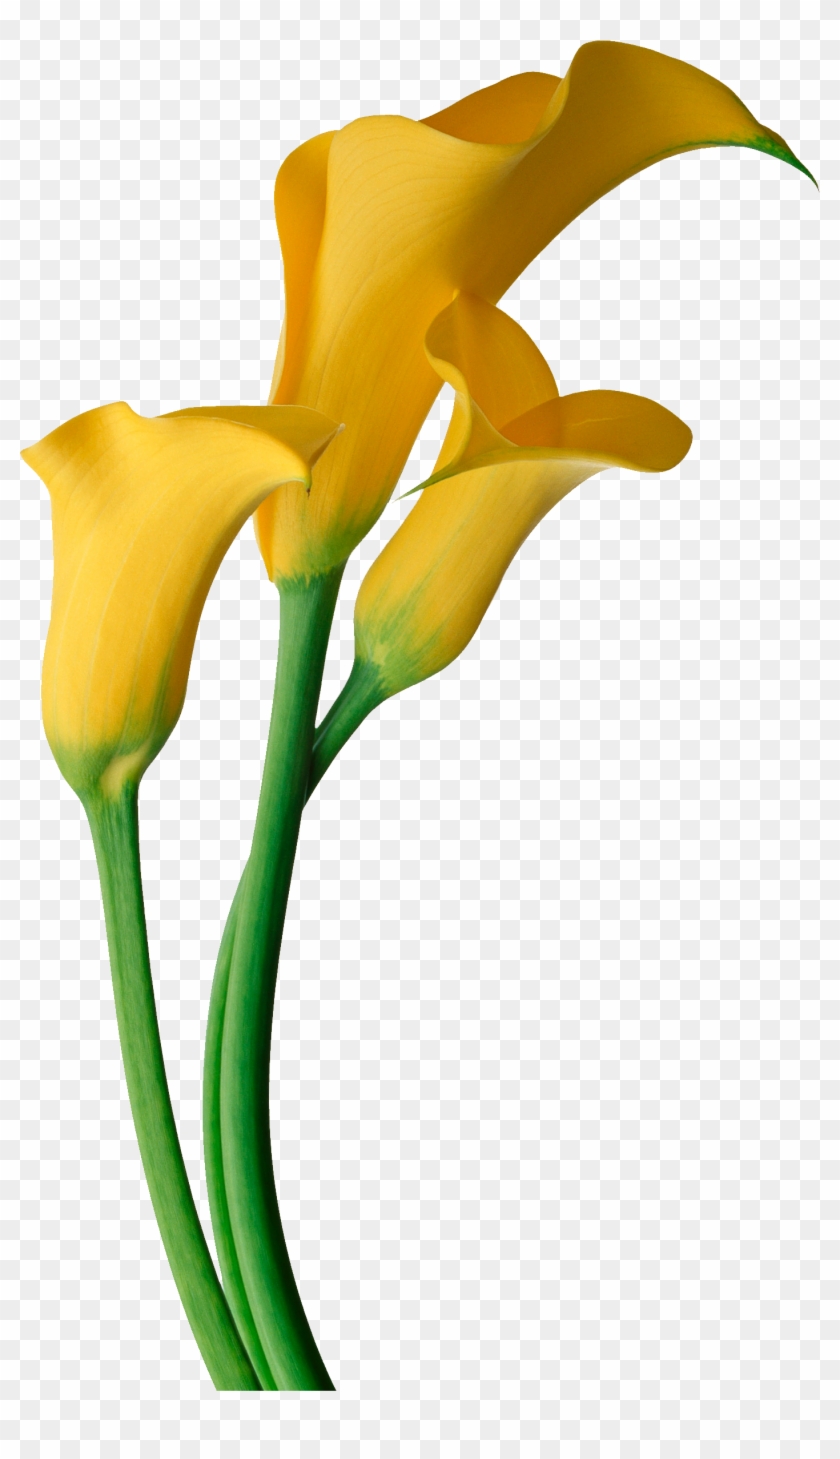 Art Images, Flower Clipart, Lilies Flowers, Calla Lily, - Calla Lily Flower Png #297882